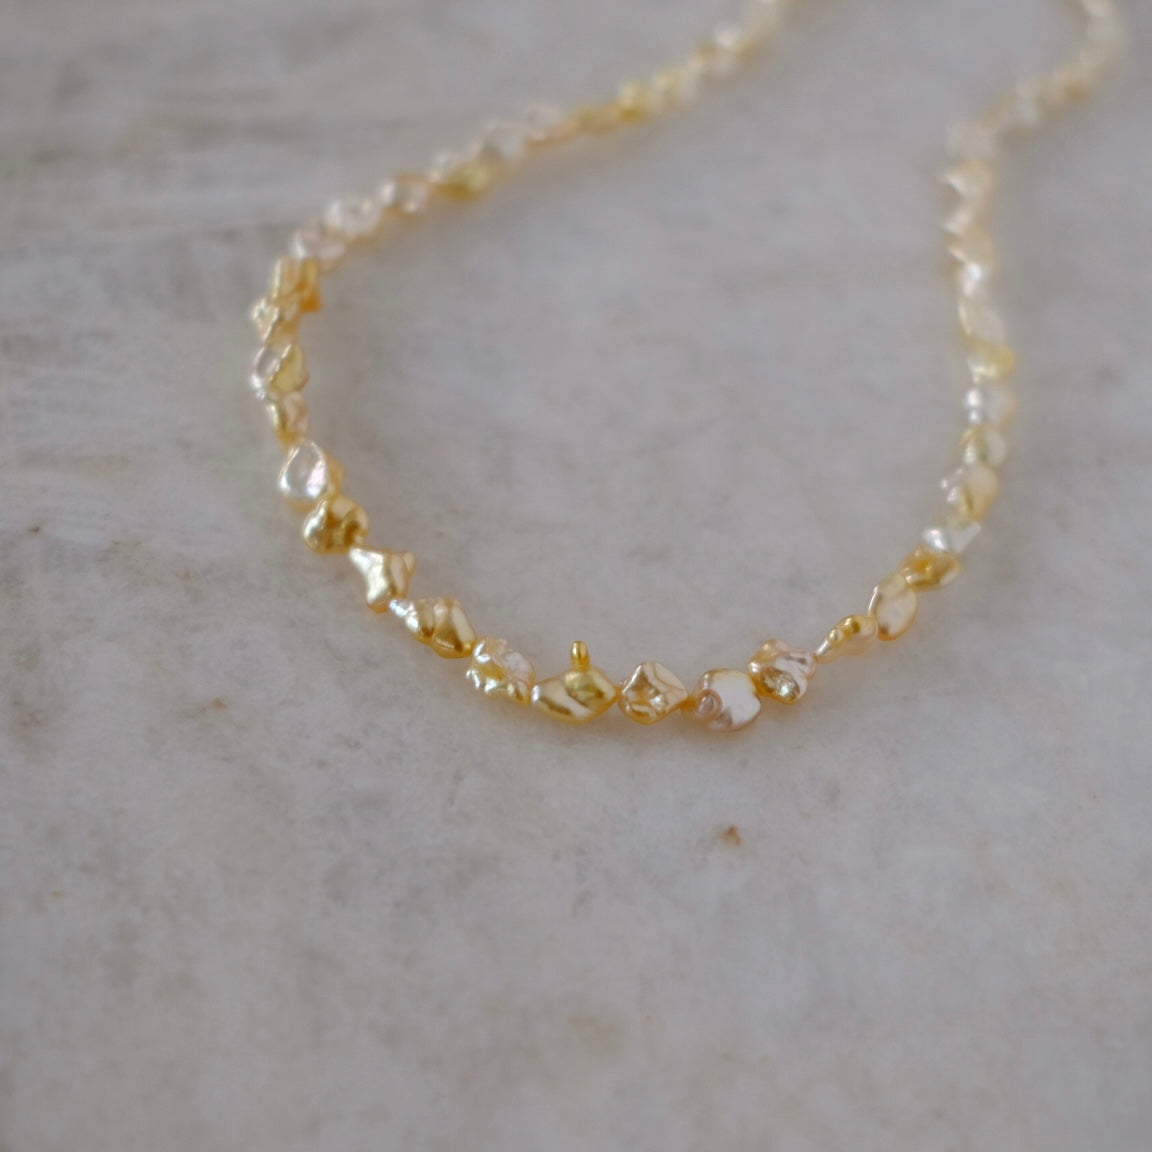 Golden South Sea Pearl Necklace, Keshi, 4-7mm